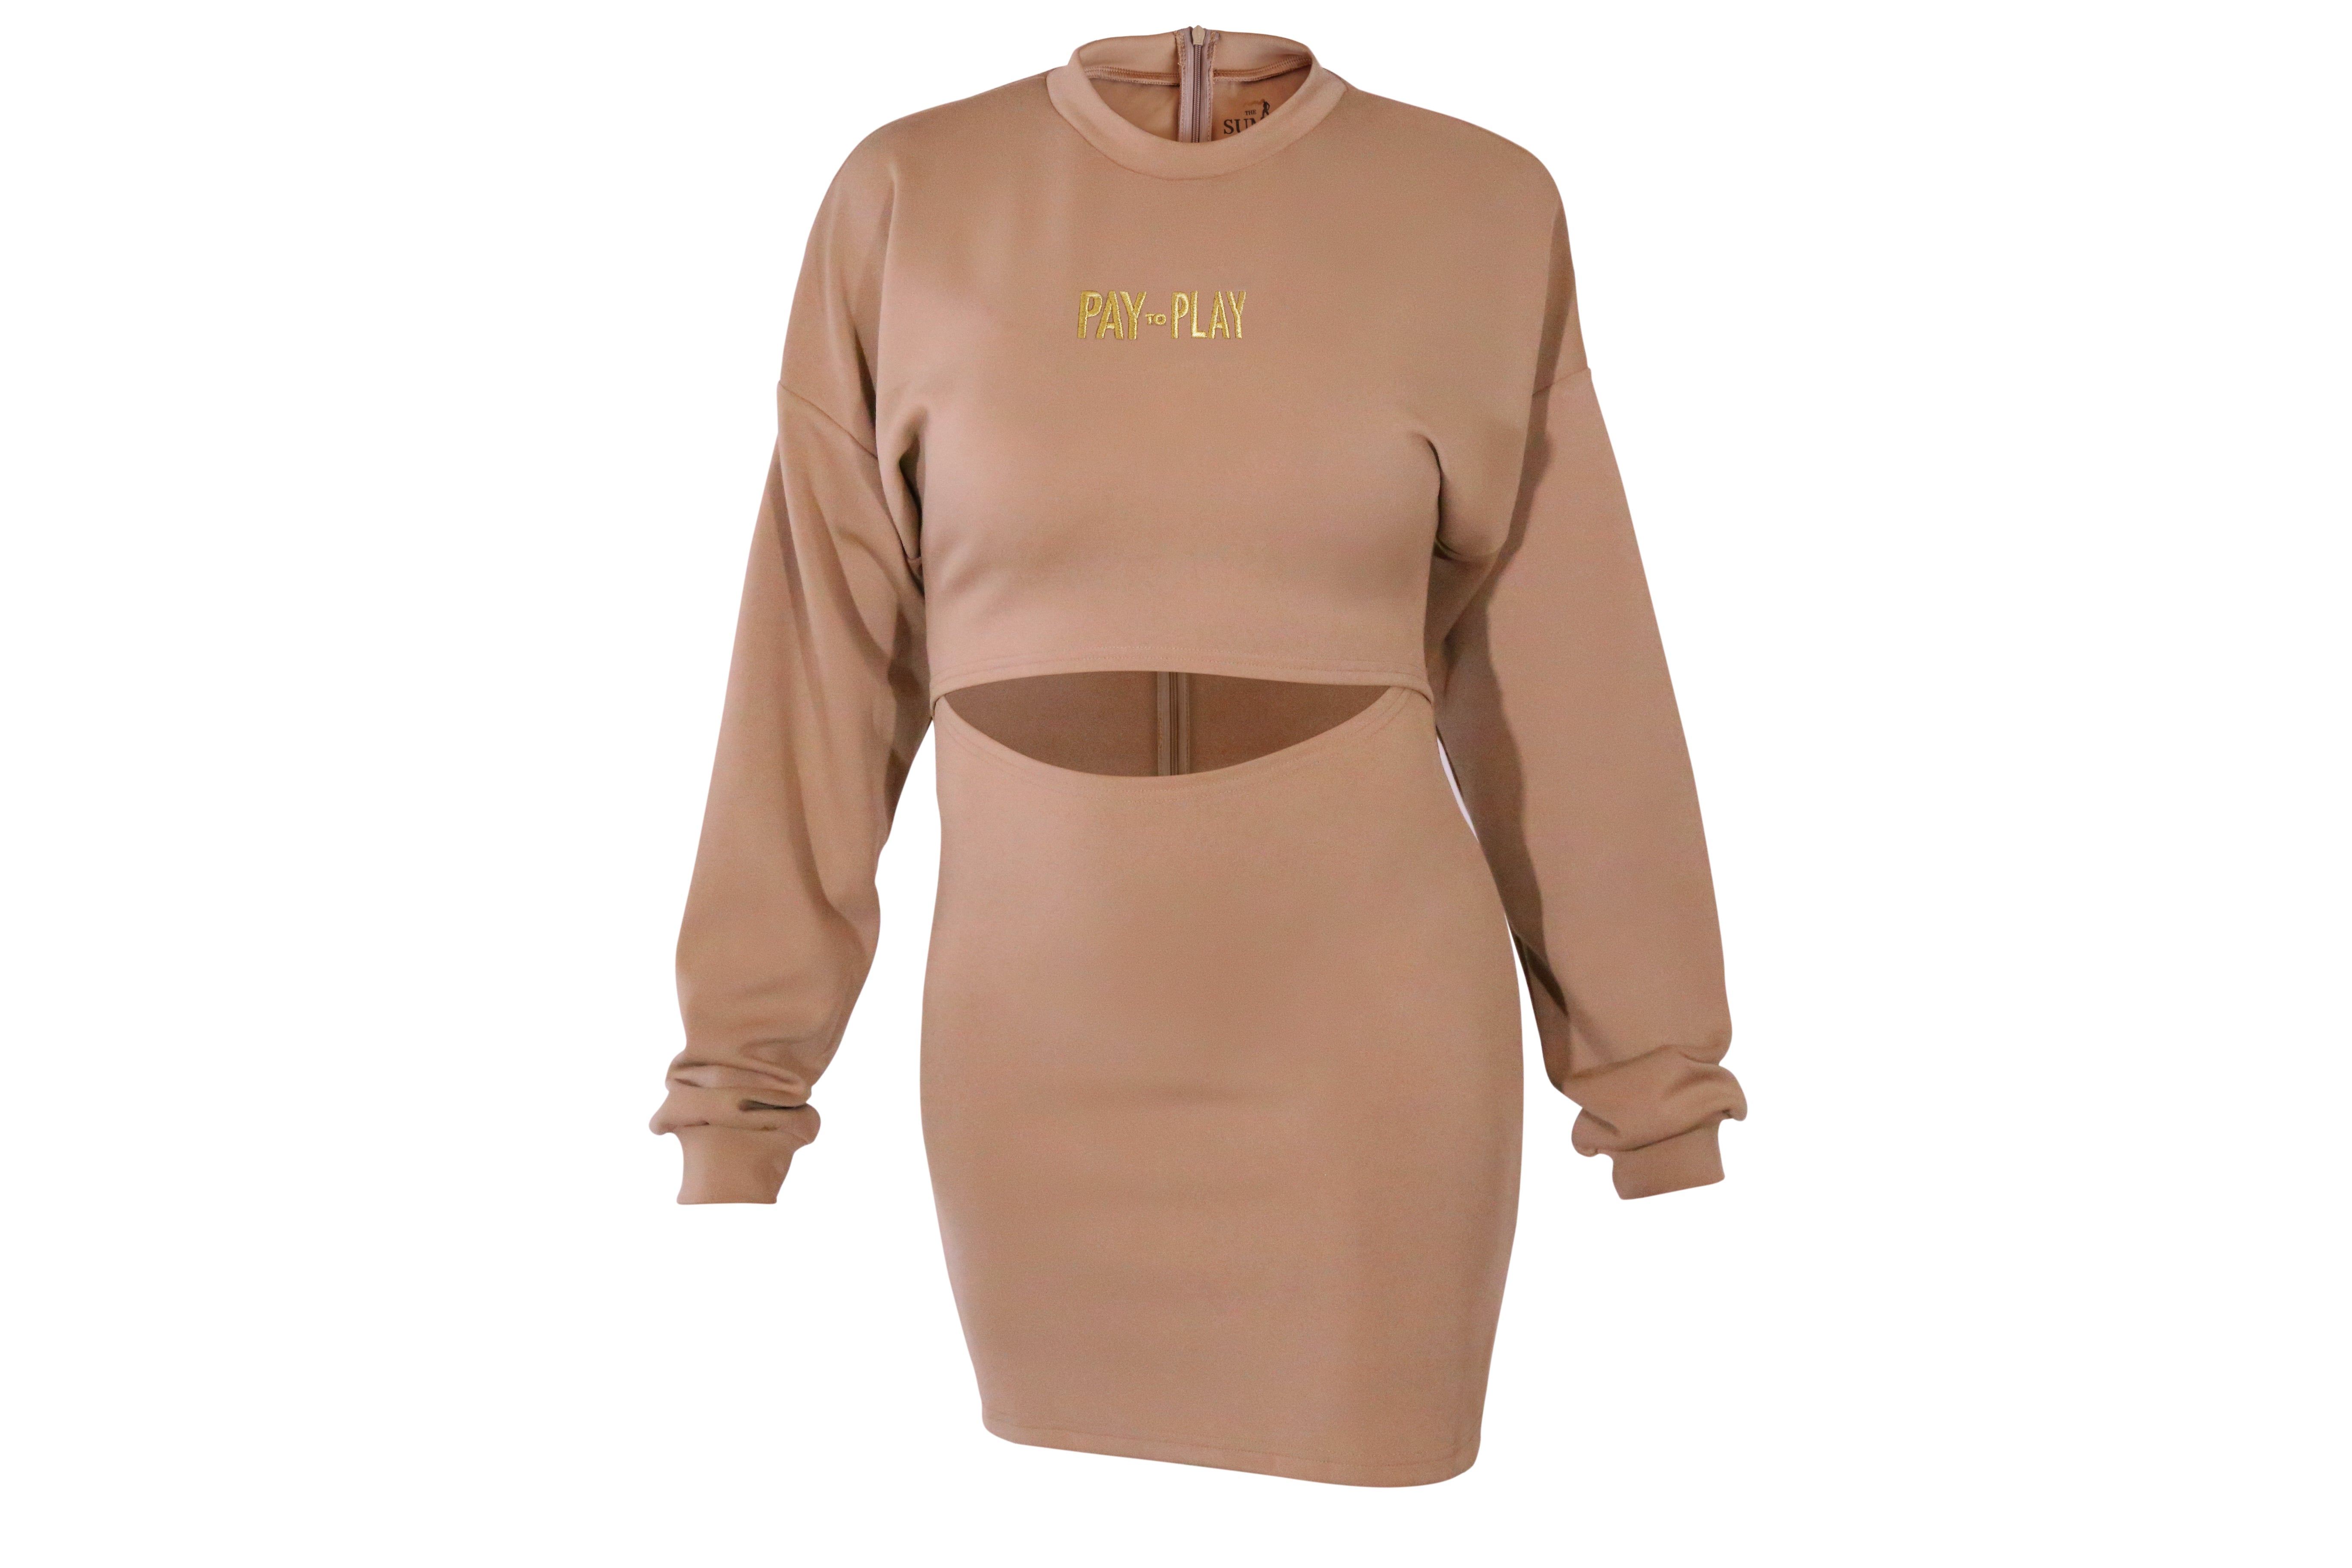 Pay to Play Cutout Sweater Dress